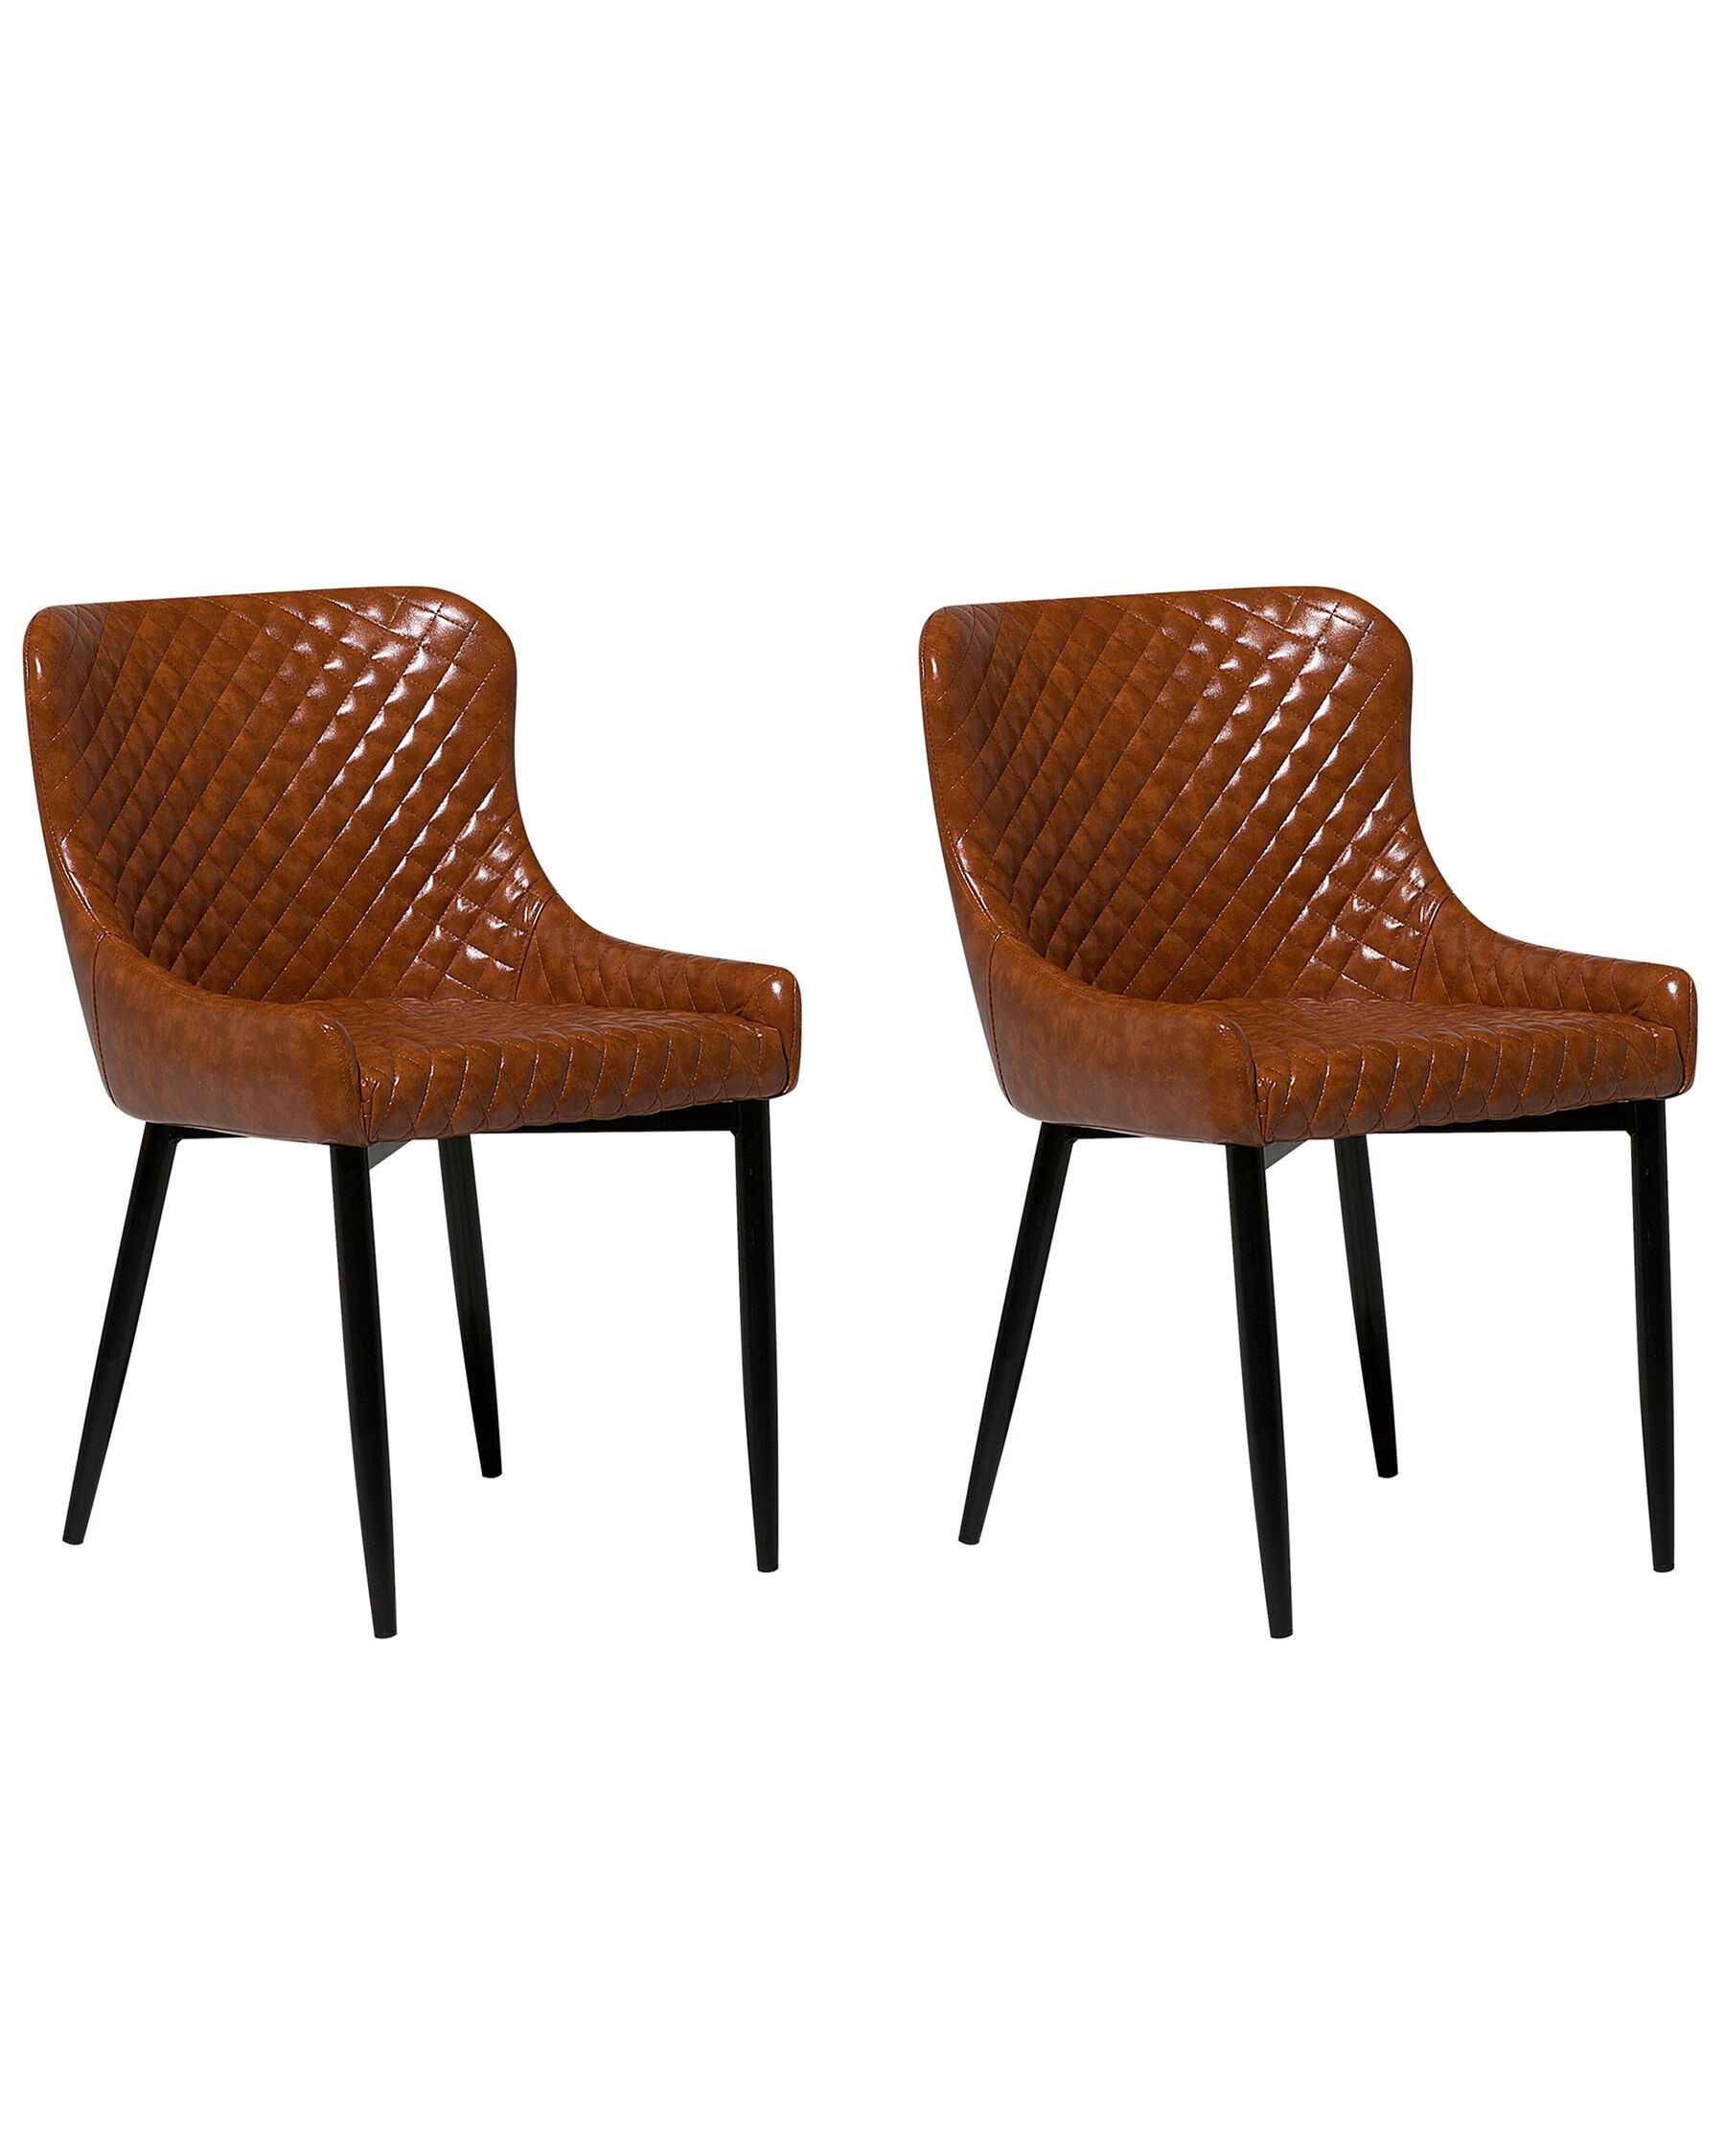 Stylish Dining Chair Set of 2 Pieces Faux Leather Brown Solano -